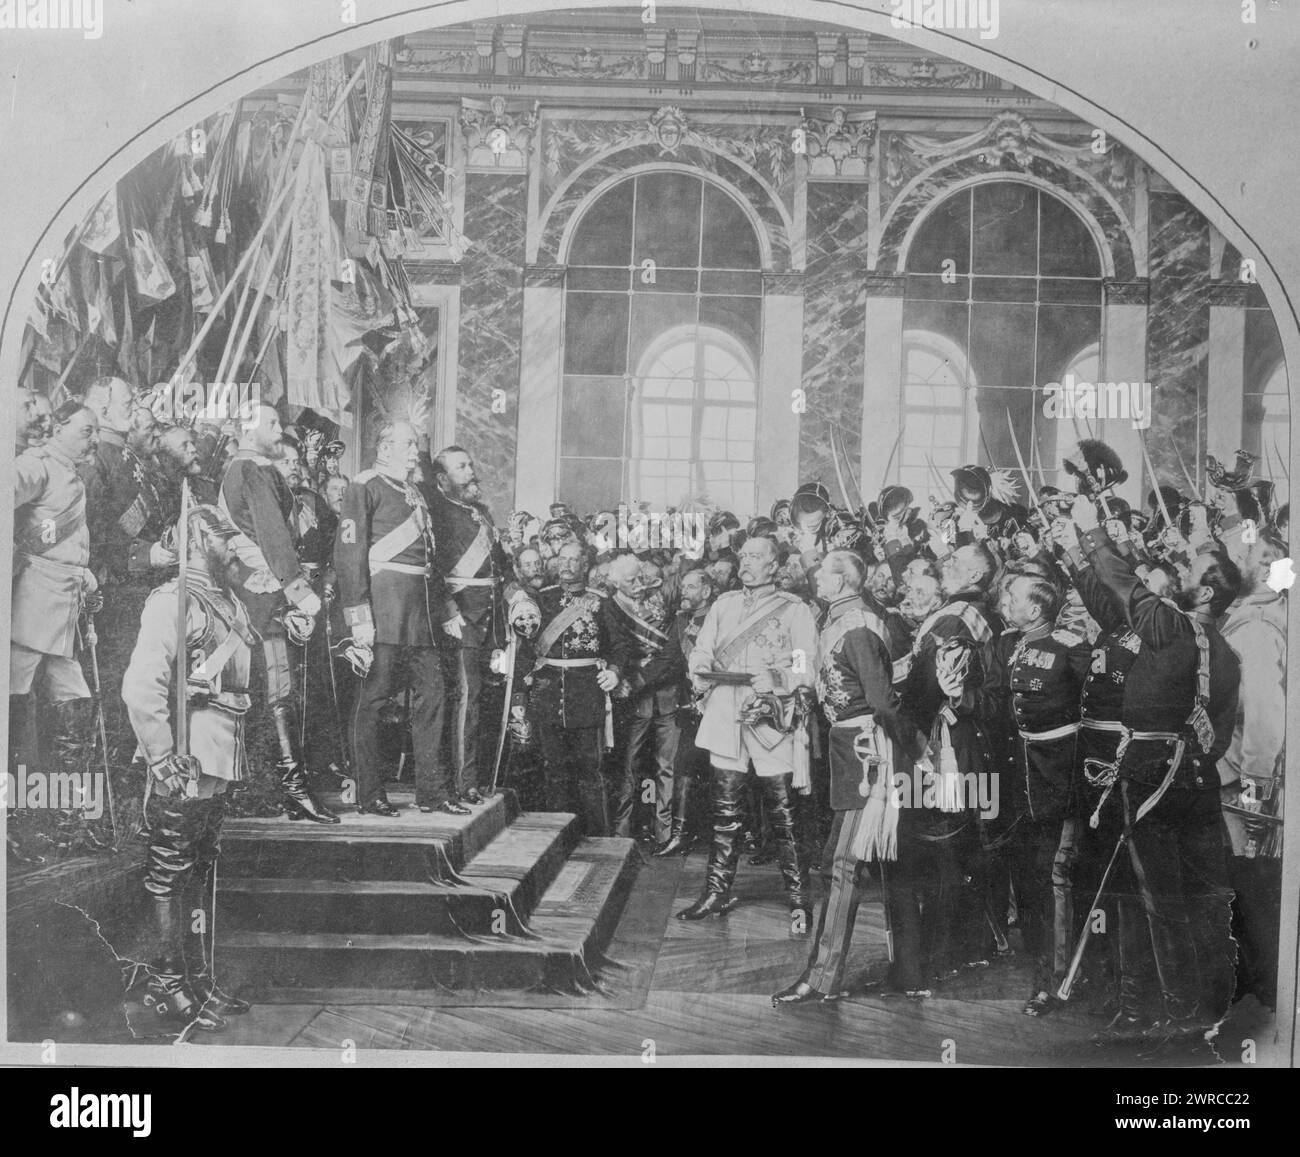 Crowning of Wilhelm I of Germany, Photograph shows a painting by Anton von Werner of the crowning of Wilhelm I of Germany (1797-1888) in 1871. Von Werner painted the picture in 1885., between ca. 1915 and ca. 1920, Glass negatives, 1 negative: glass Stock Photo